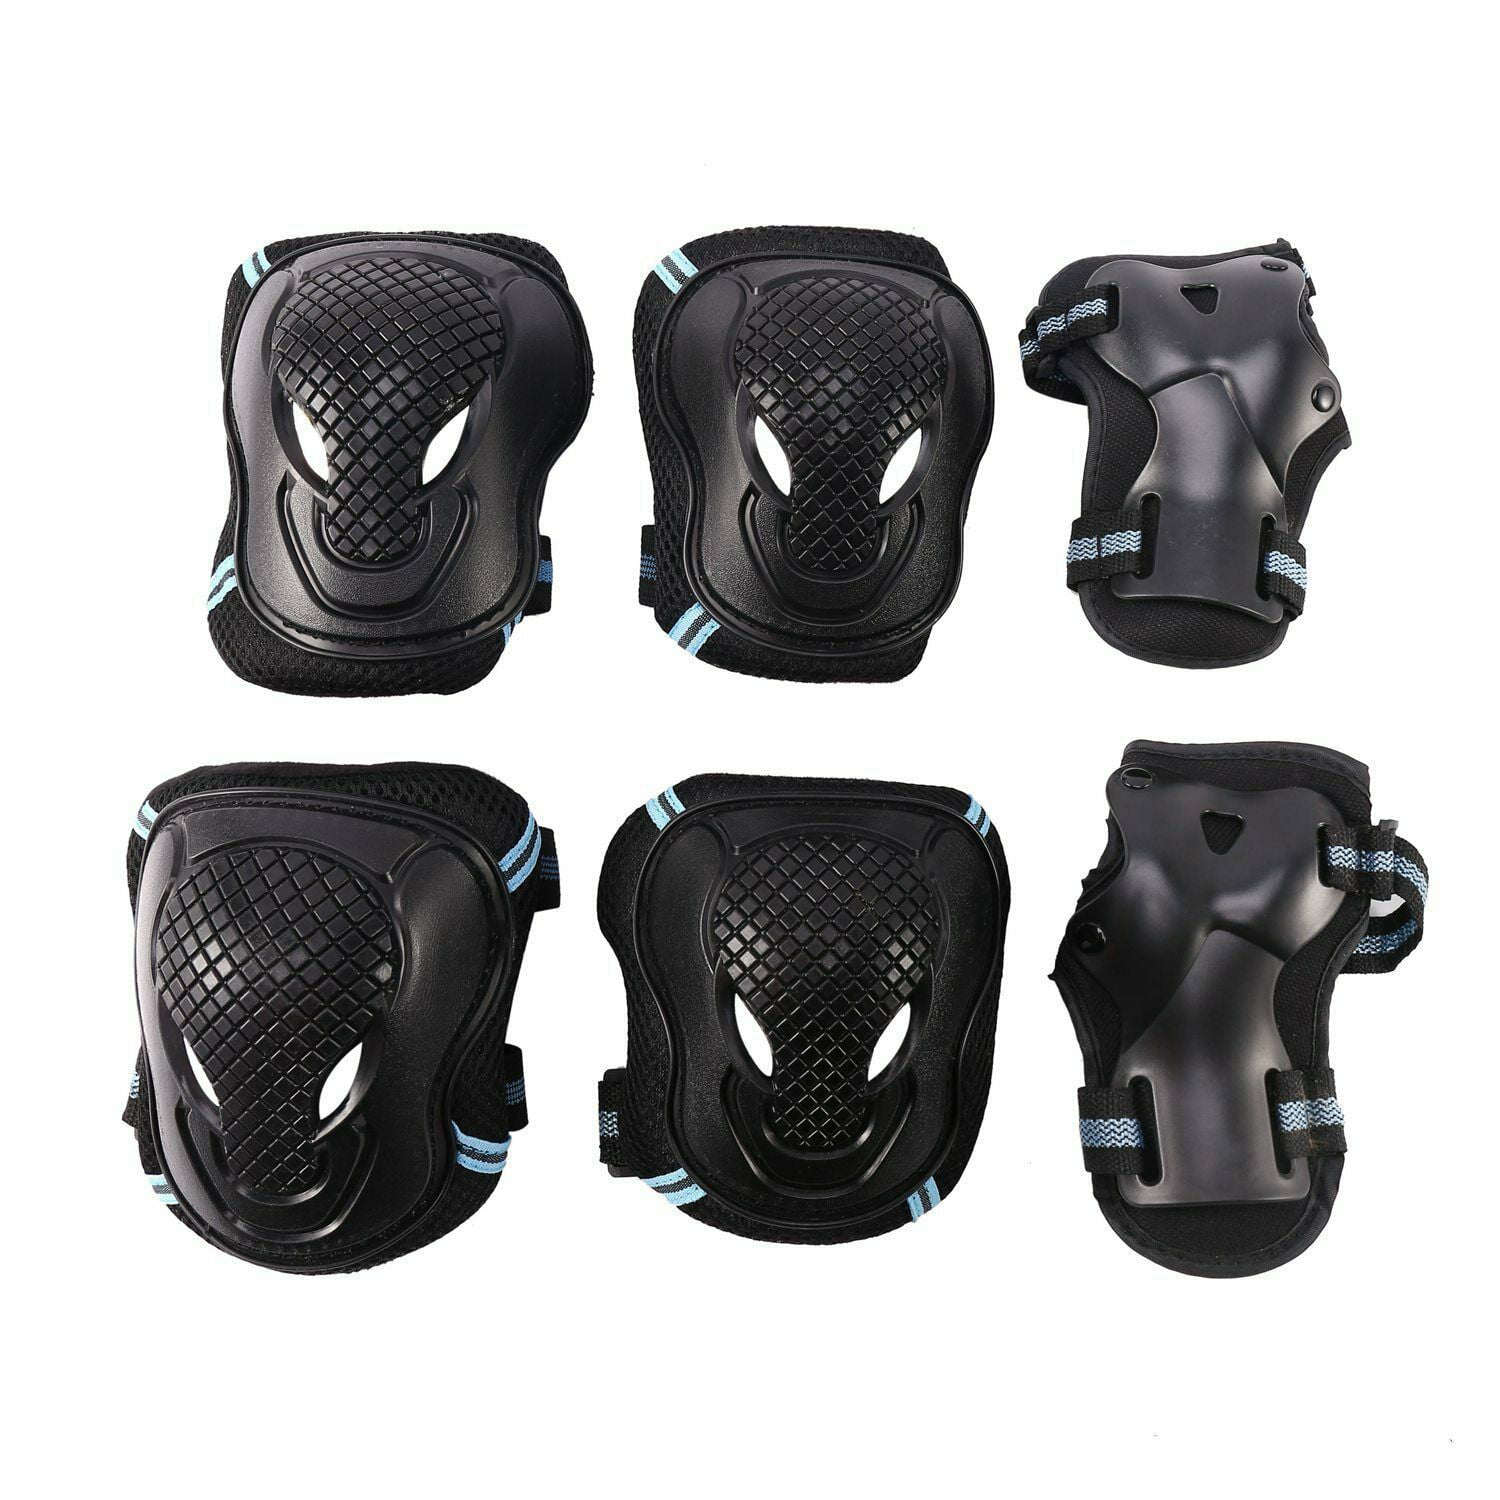 2 set Knee Wrist Guard Elbow Pad for Adult Roller Skating Bicycle Protective 